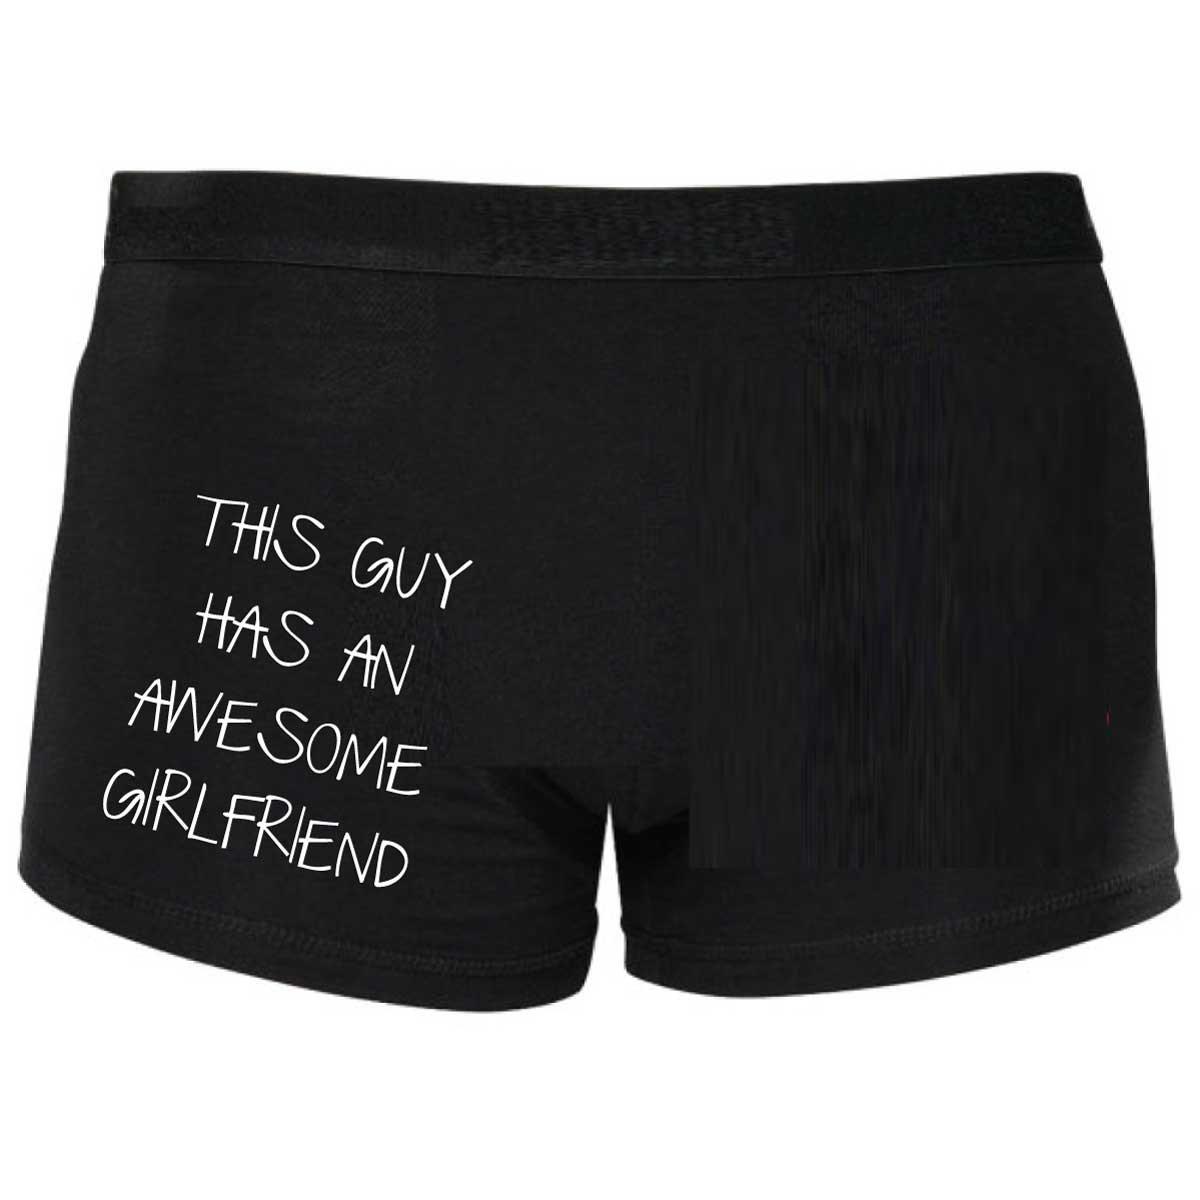 This Guy Has An Awesome Girlfriend Boxers  Boxers